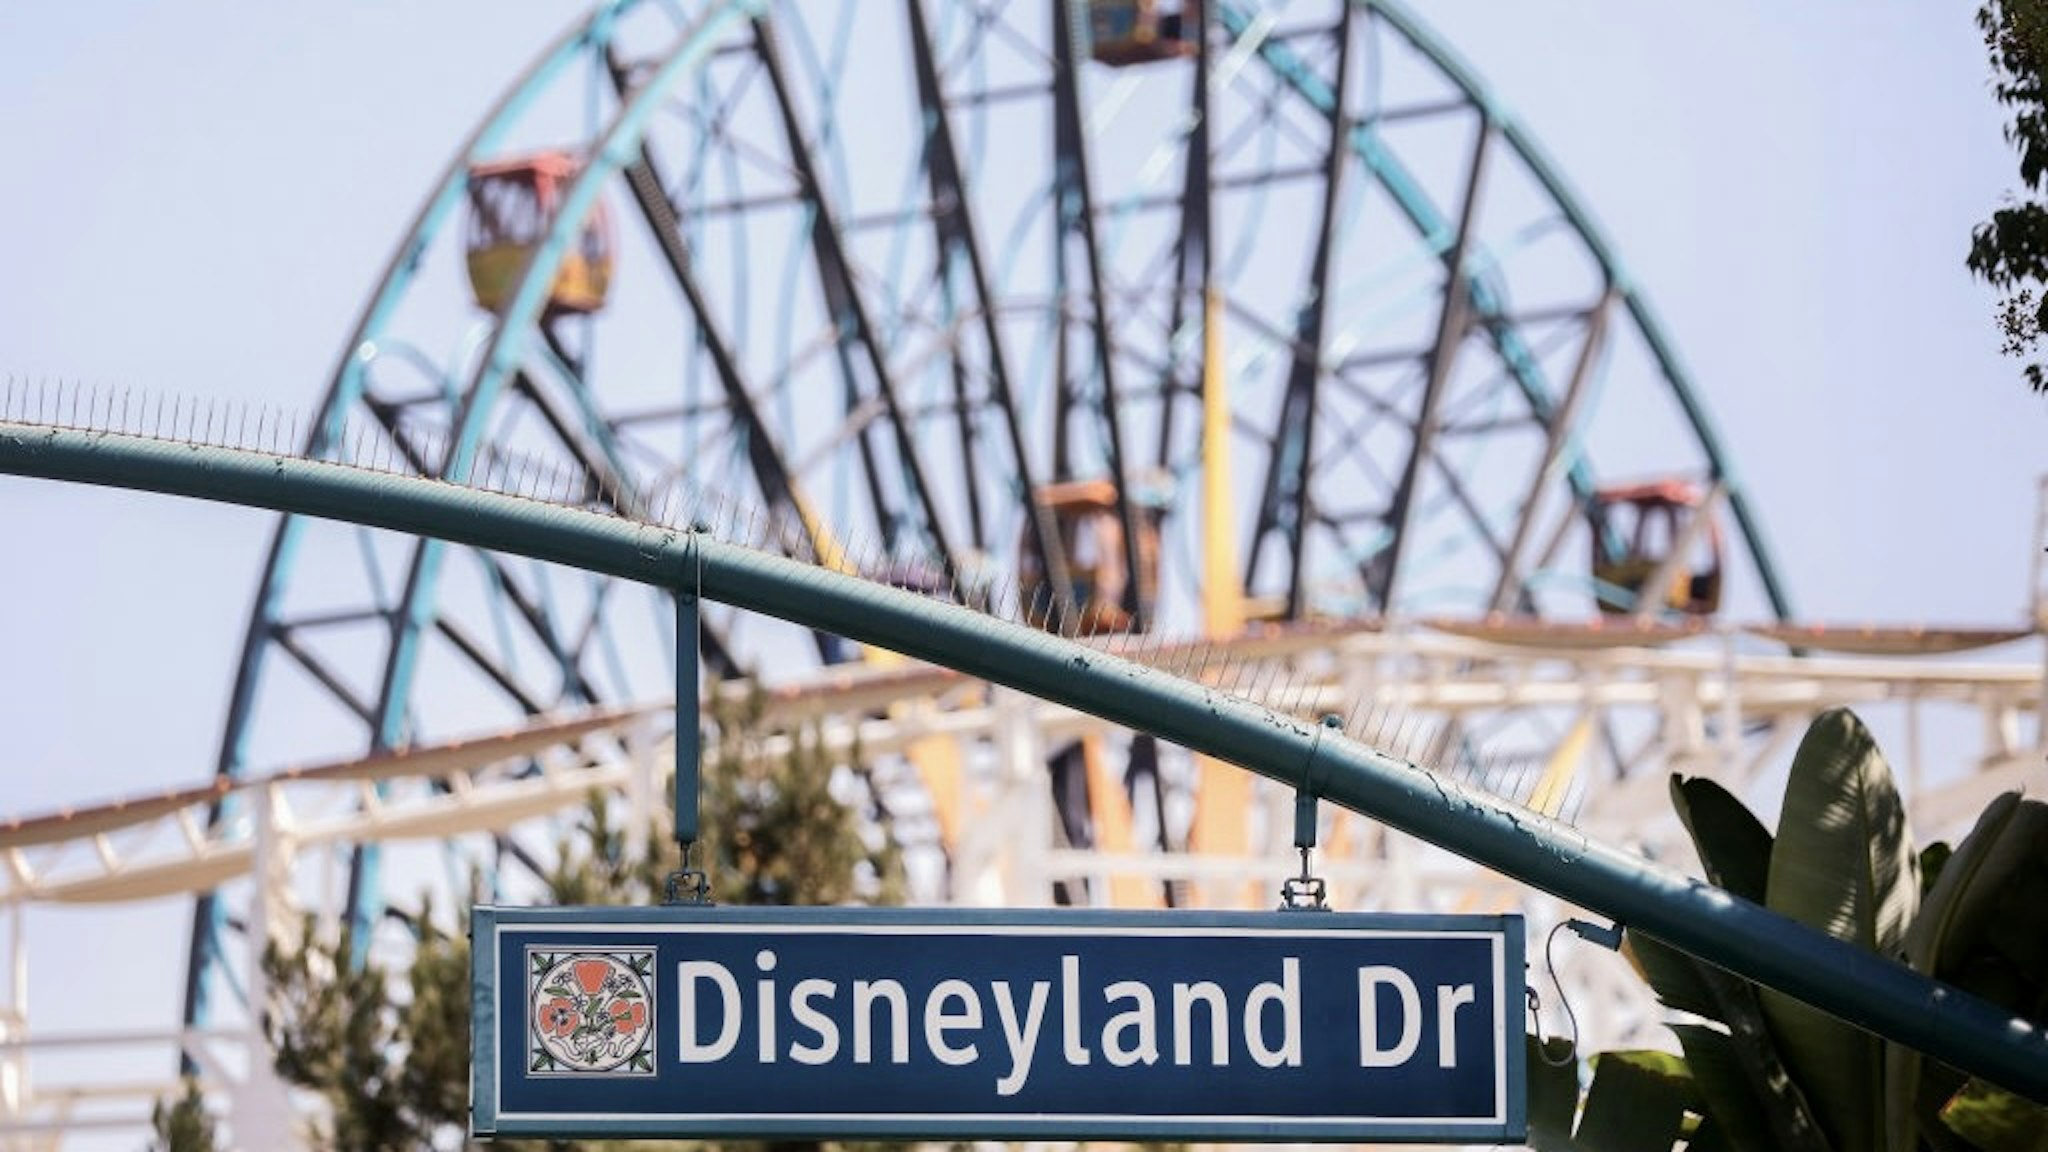 ANAHEIM, CALIFORNIA - SEPTEMBER 30: A sign for Disneyland Drive hangs near empty amusement rides on September 30, 2020 in Anaheim, California. Disney is laying off 28,000 workers amid the toll of the COVID-19 pandemic on theme parks. (Photo by Mario Tama/Getty Images)